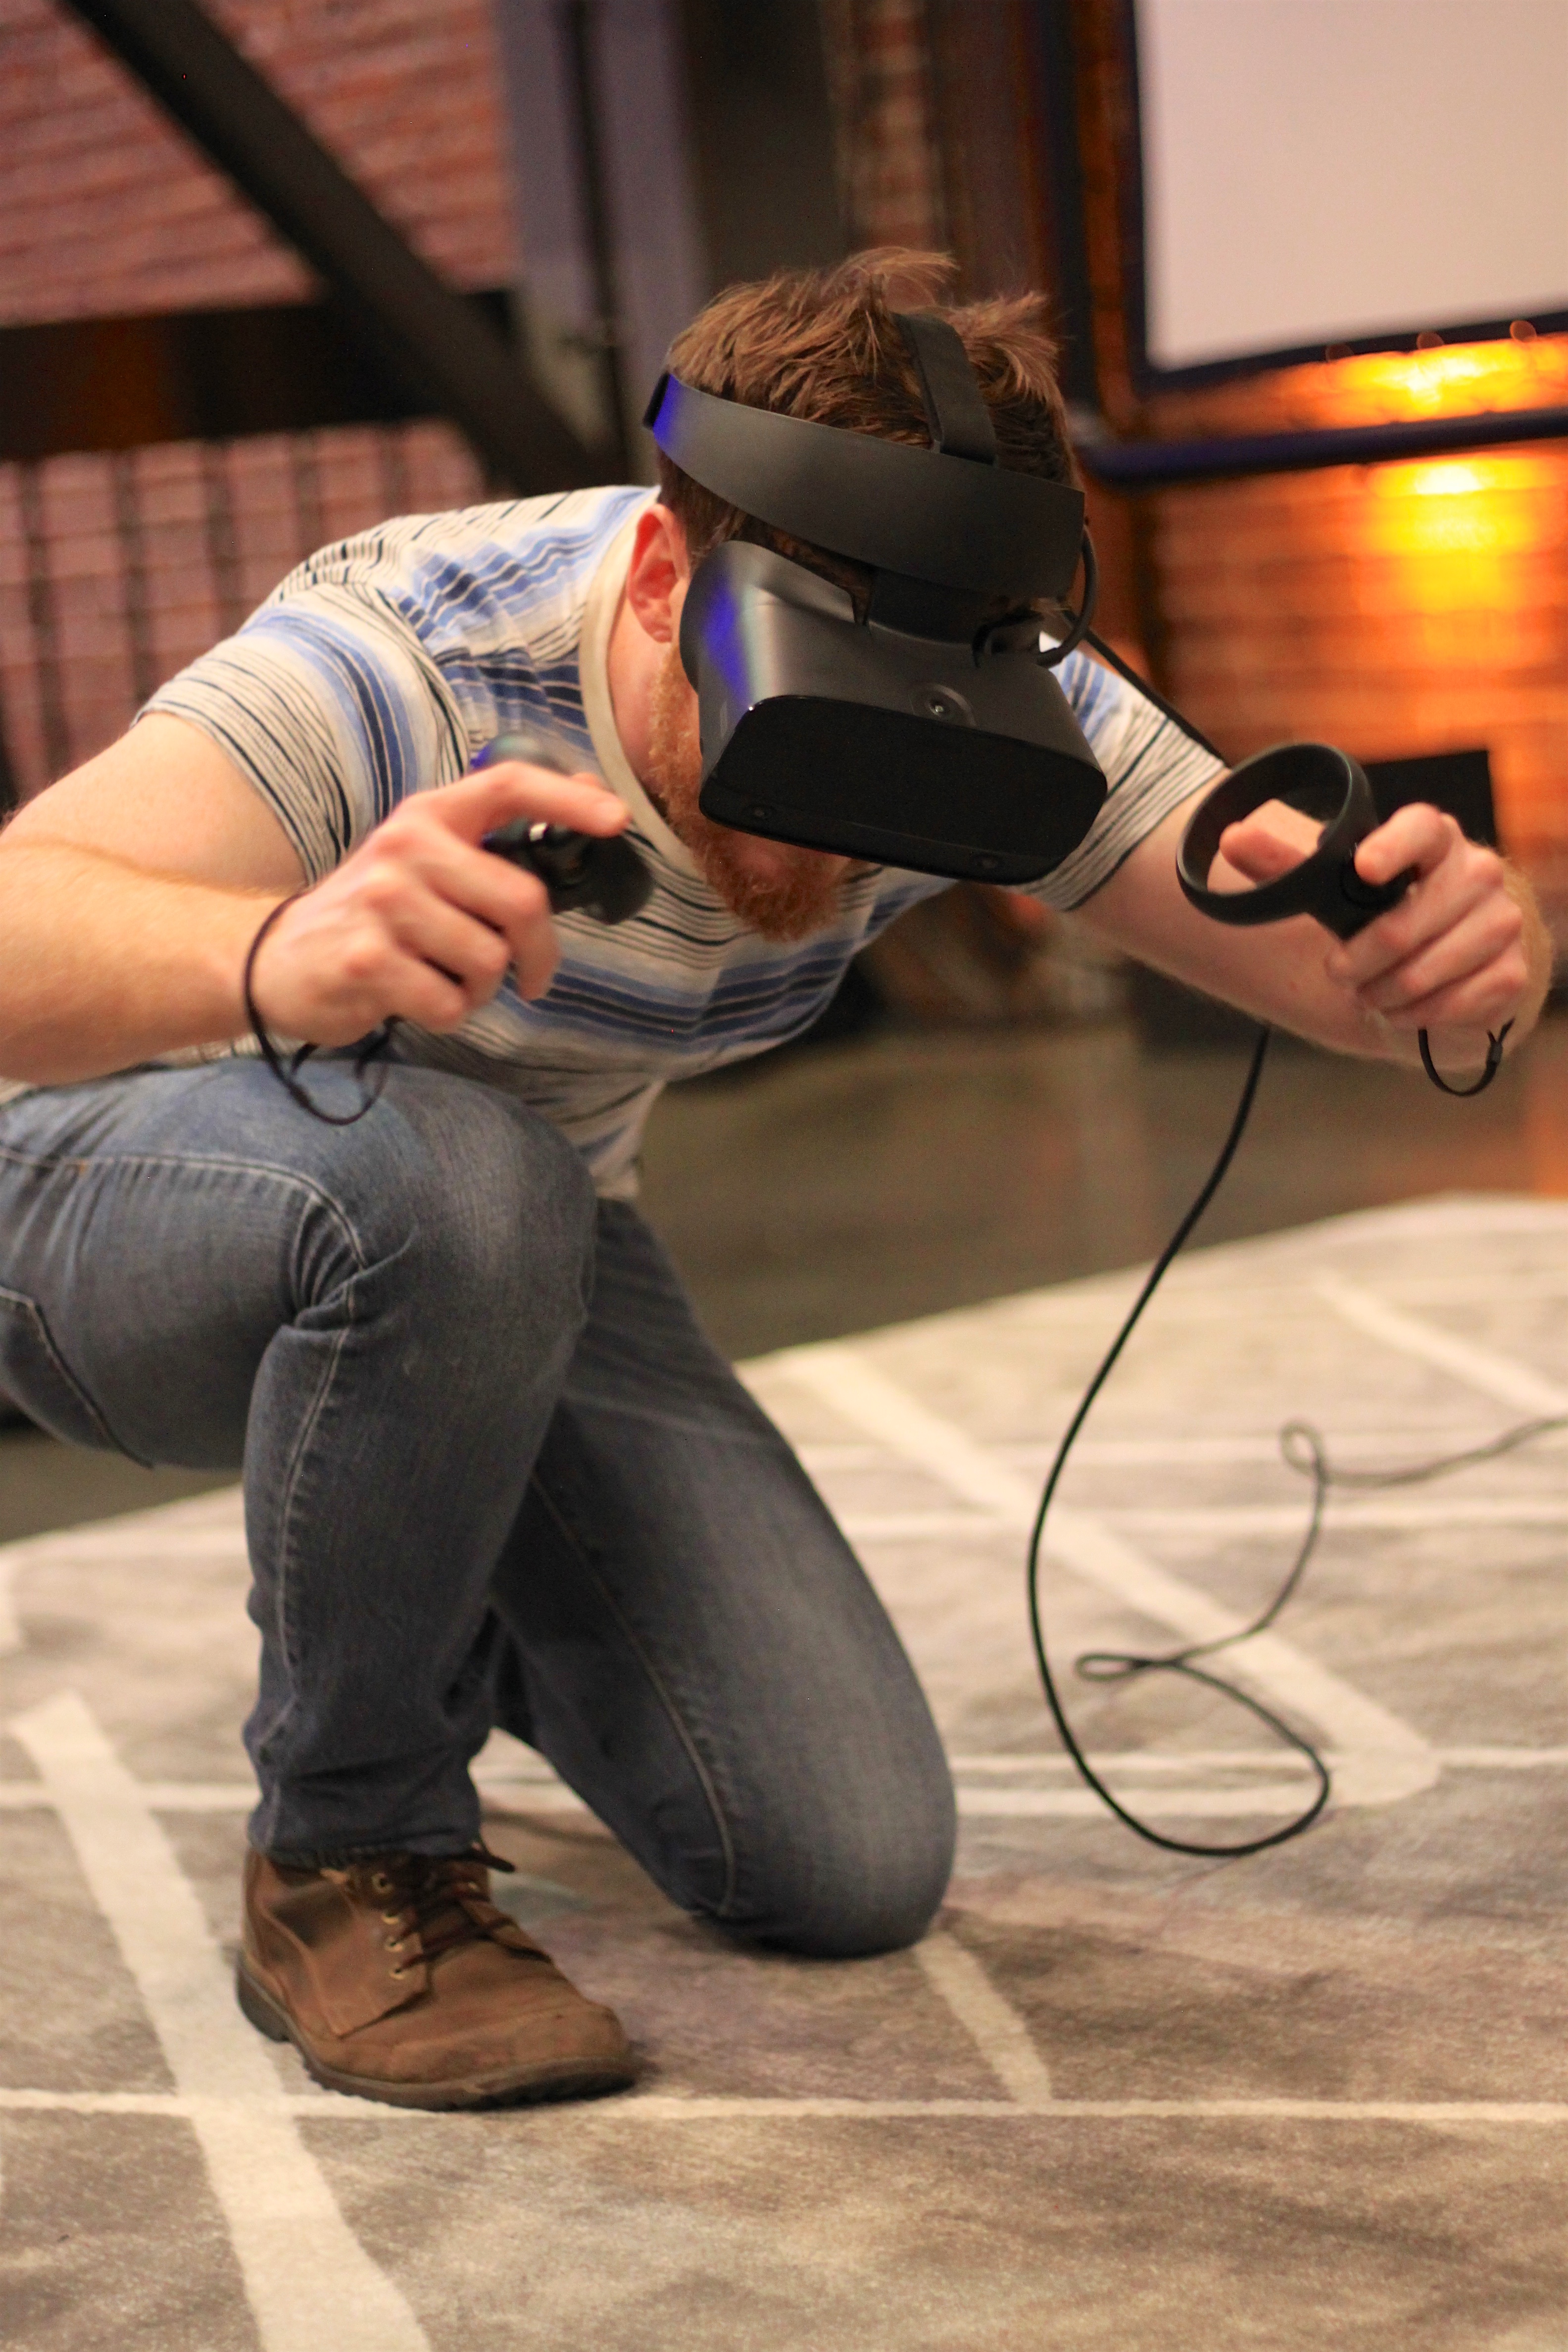 The Oculus Rift S is real and arrives in spring for $399